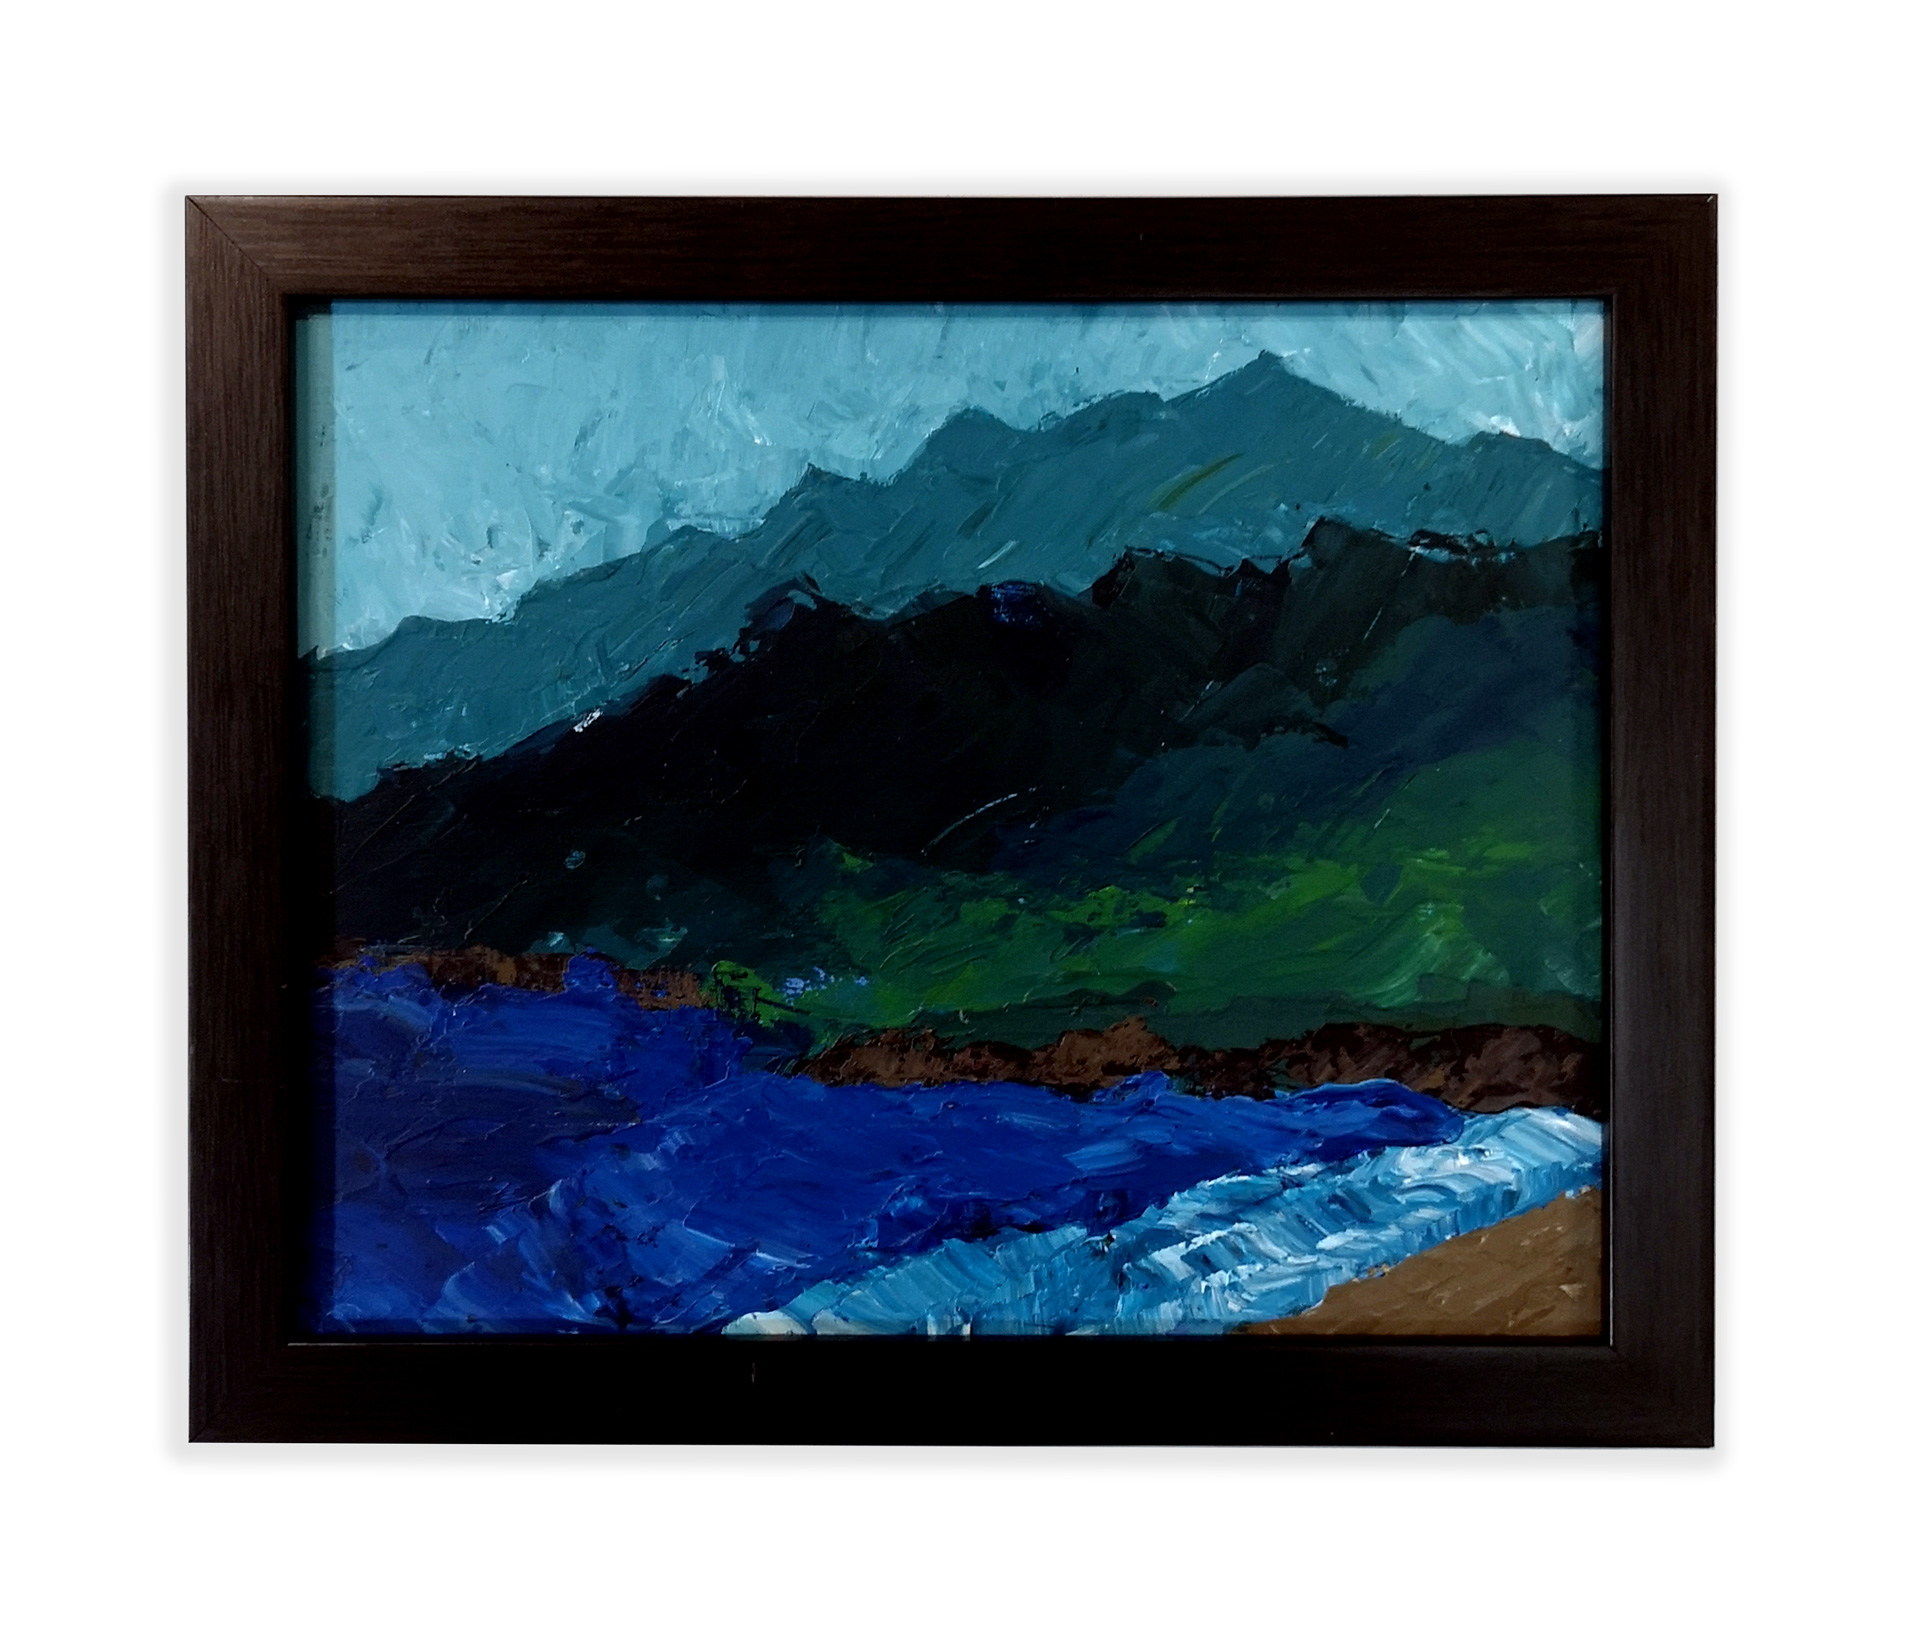 A blue and green painting of a landscape with mountains and the beach done with pallet knives